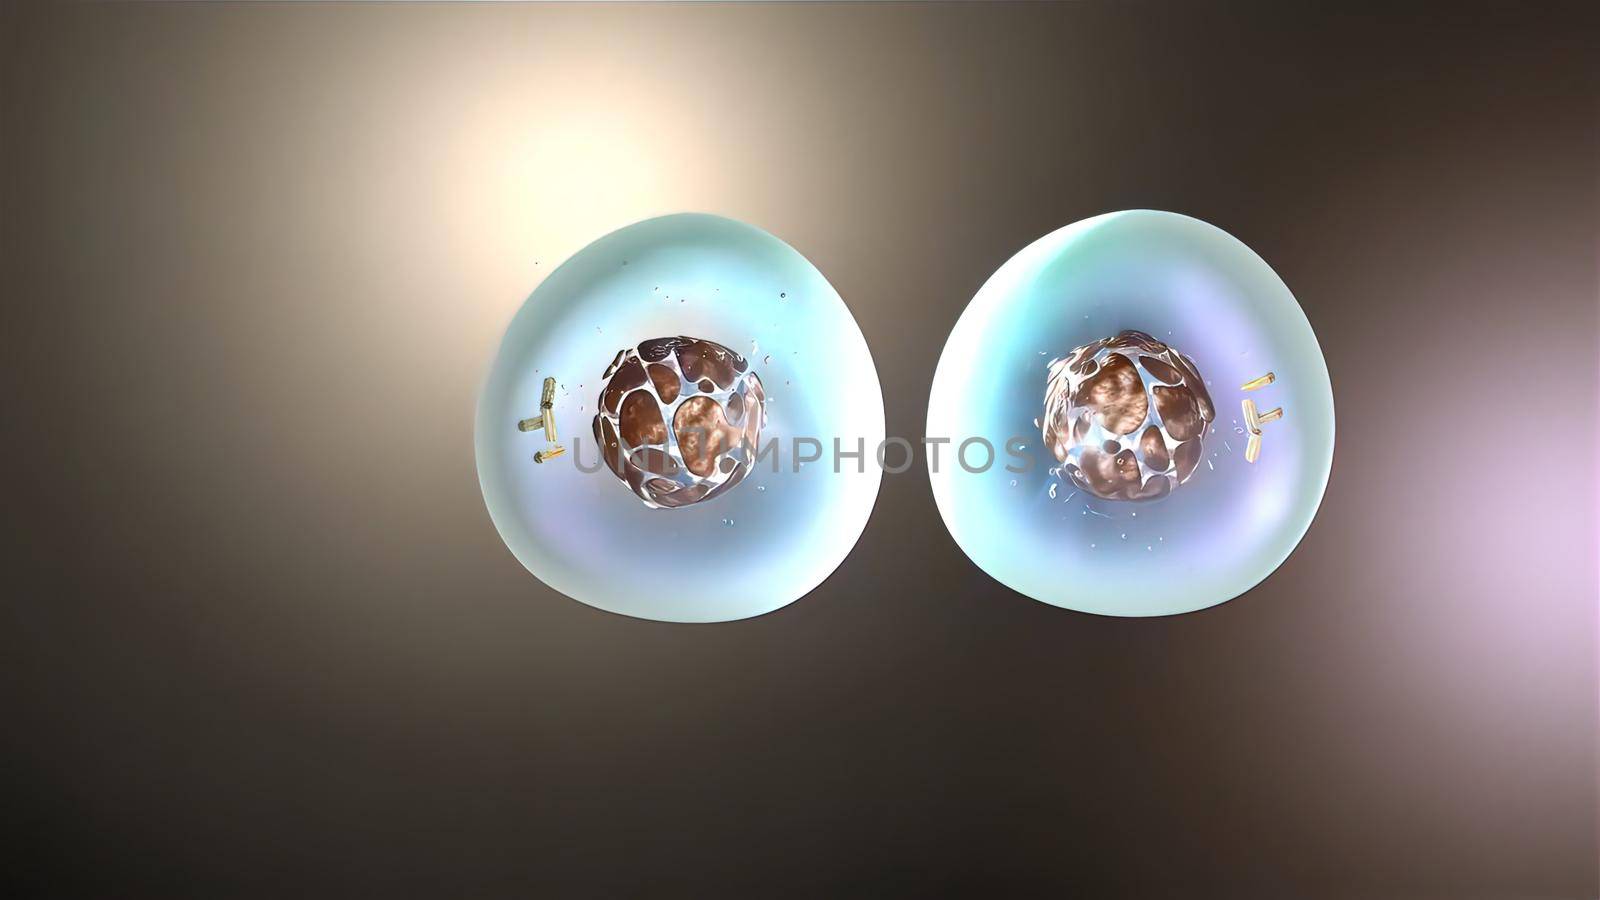 3D Medical illustration of cell division, mitosis by creativepic